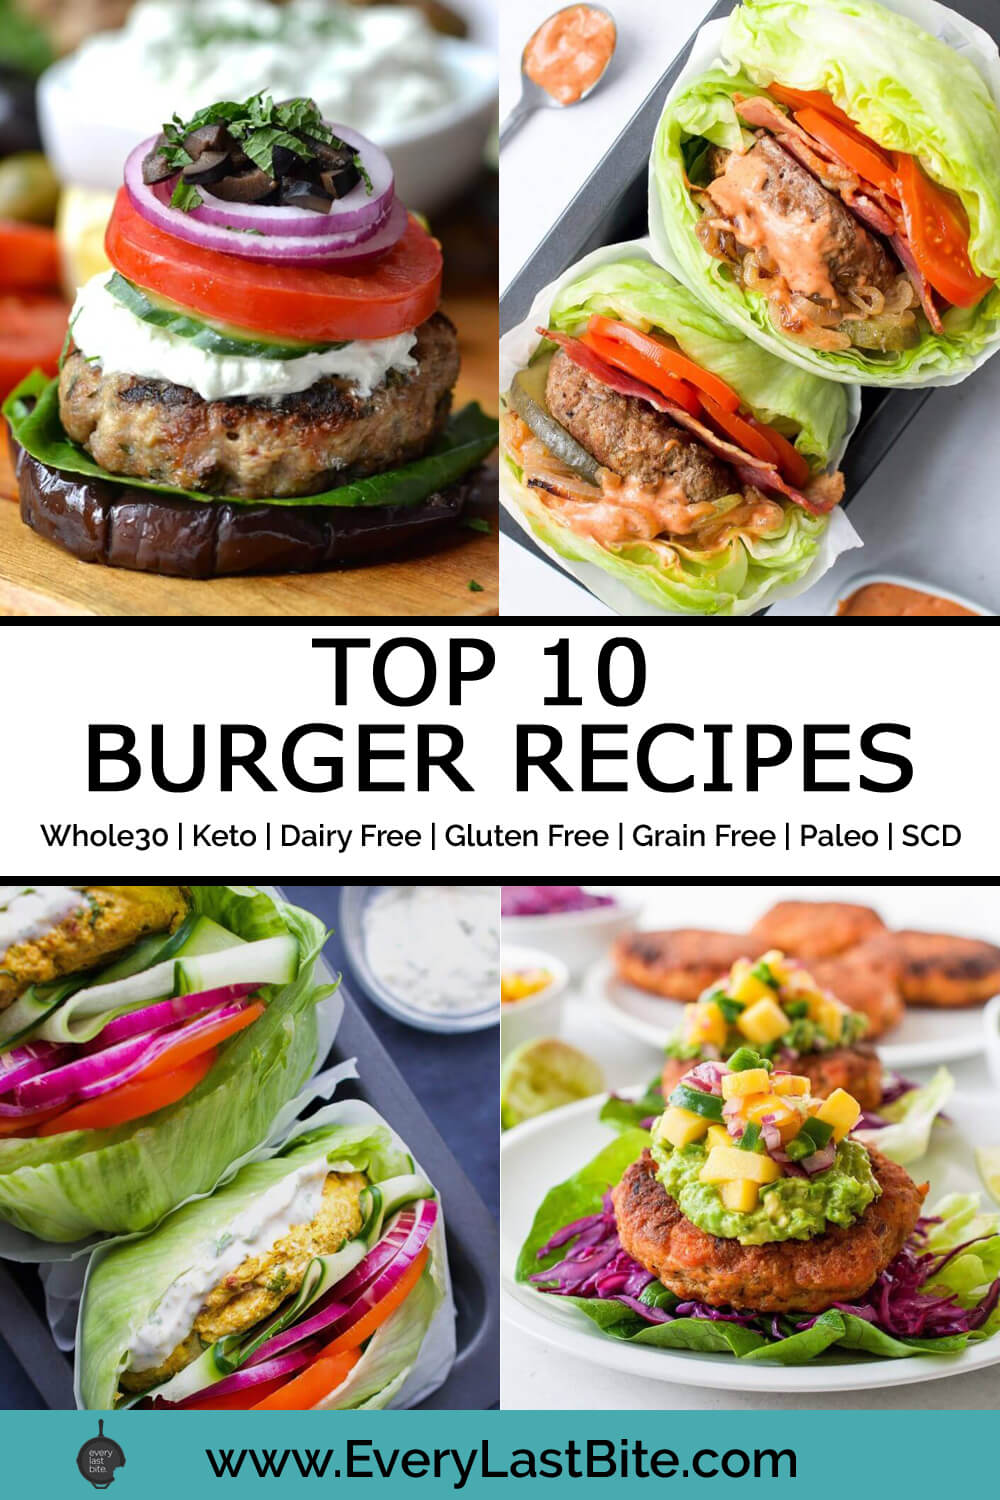 Top 10 Whole30 Burger Recipes - Every Last Bite